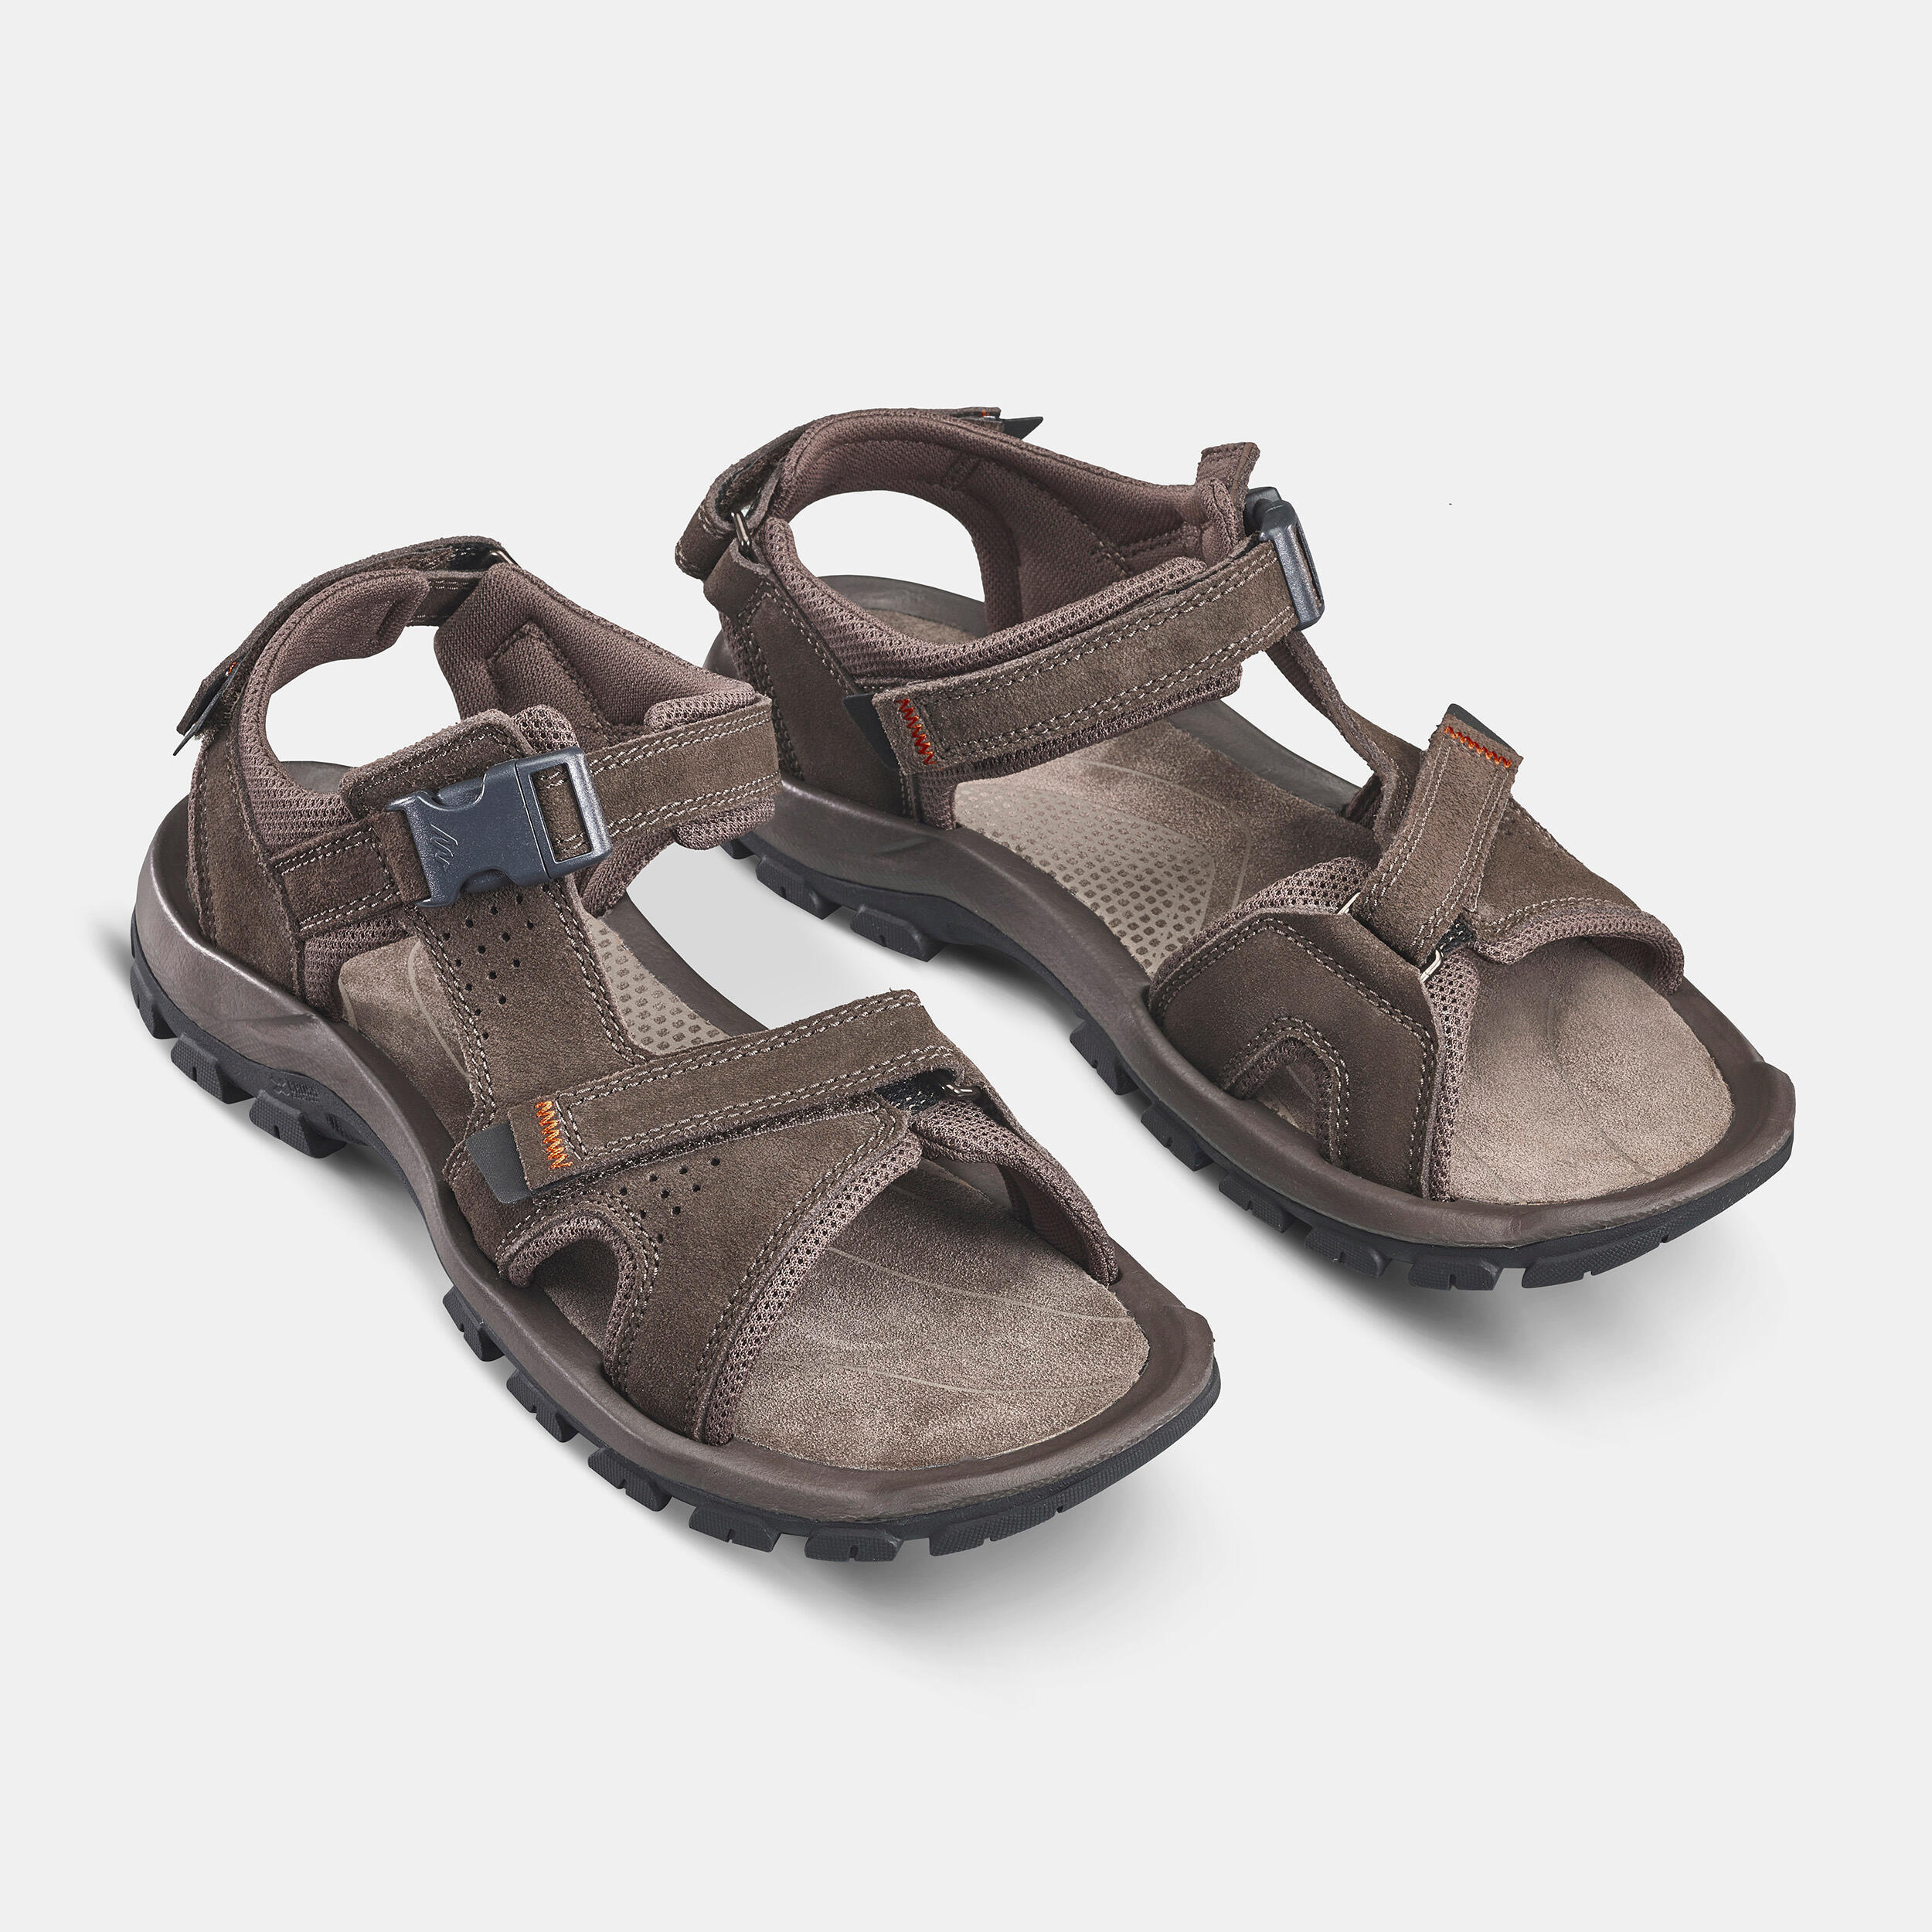 Men's Leather Hiking Sandals NH500 4/7